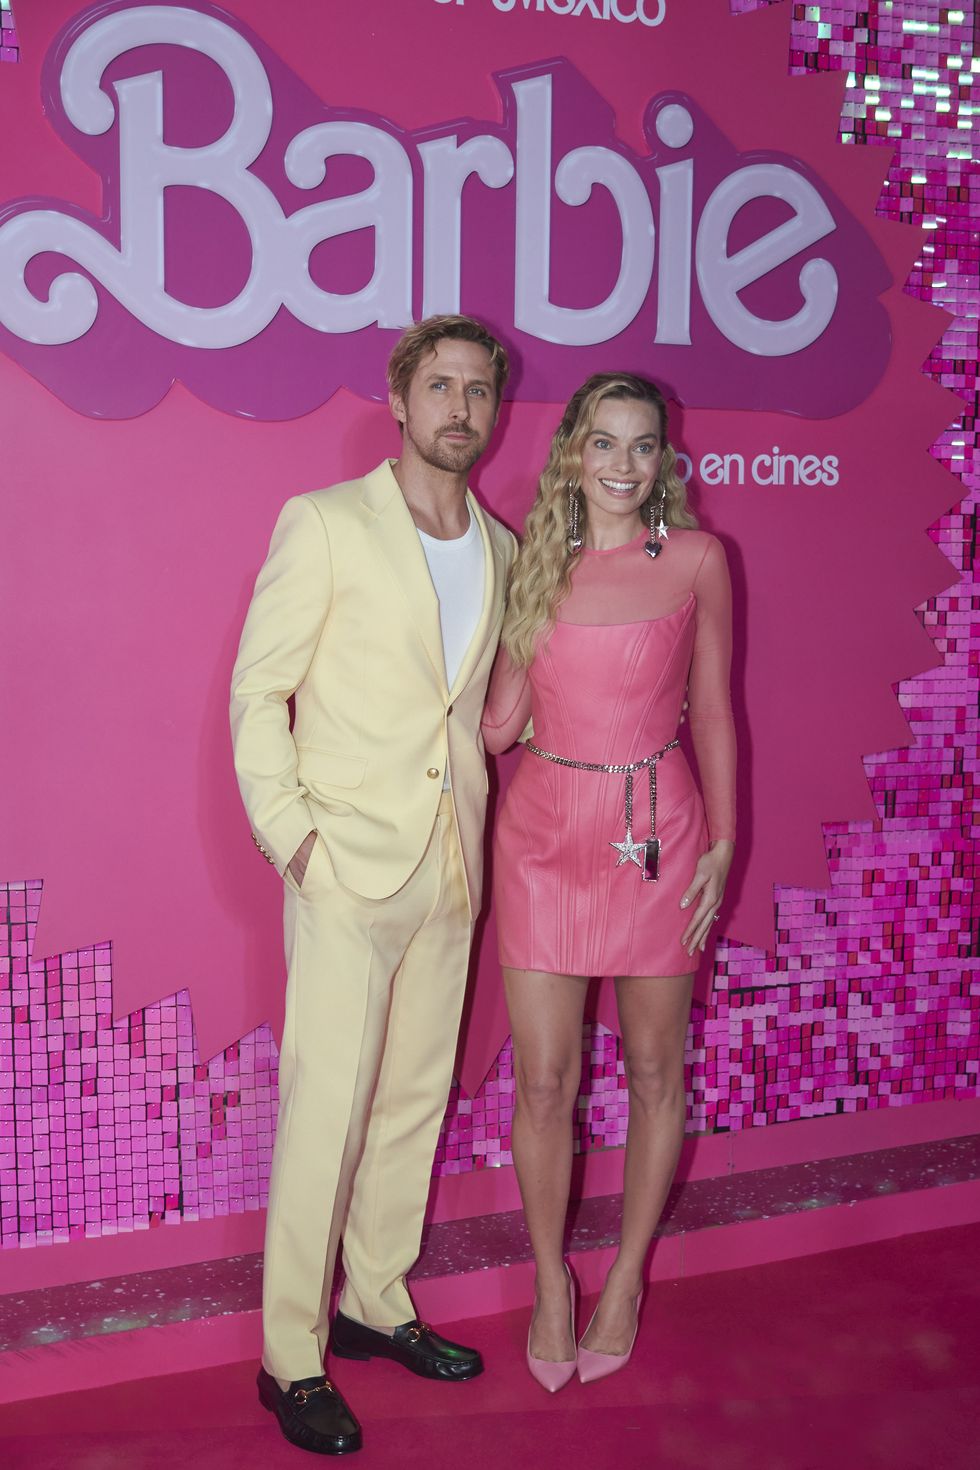 naucalpan de juarez, mexico july 6 ryan gosling and margot robbie pose for a photo during the pink carpet for barbie movie premiere, at plaza parque toreo on july 6, 2023 in naucalpan de juarez, mexico photo by jaime nogalesmedios y mediagetty images